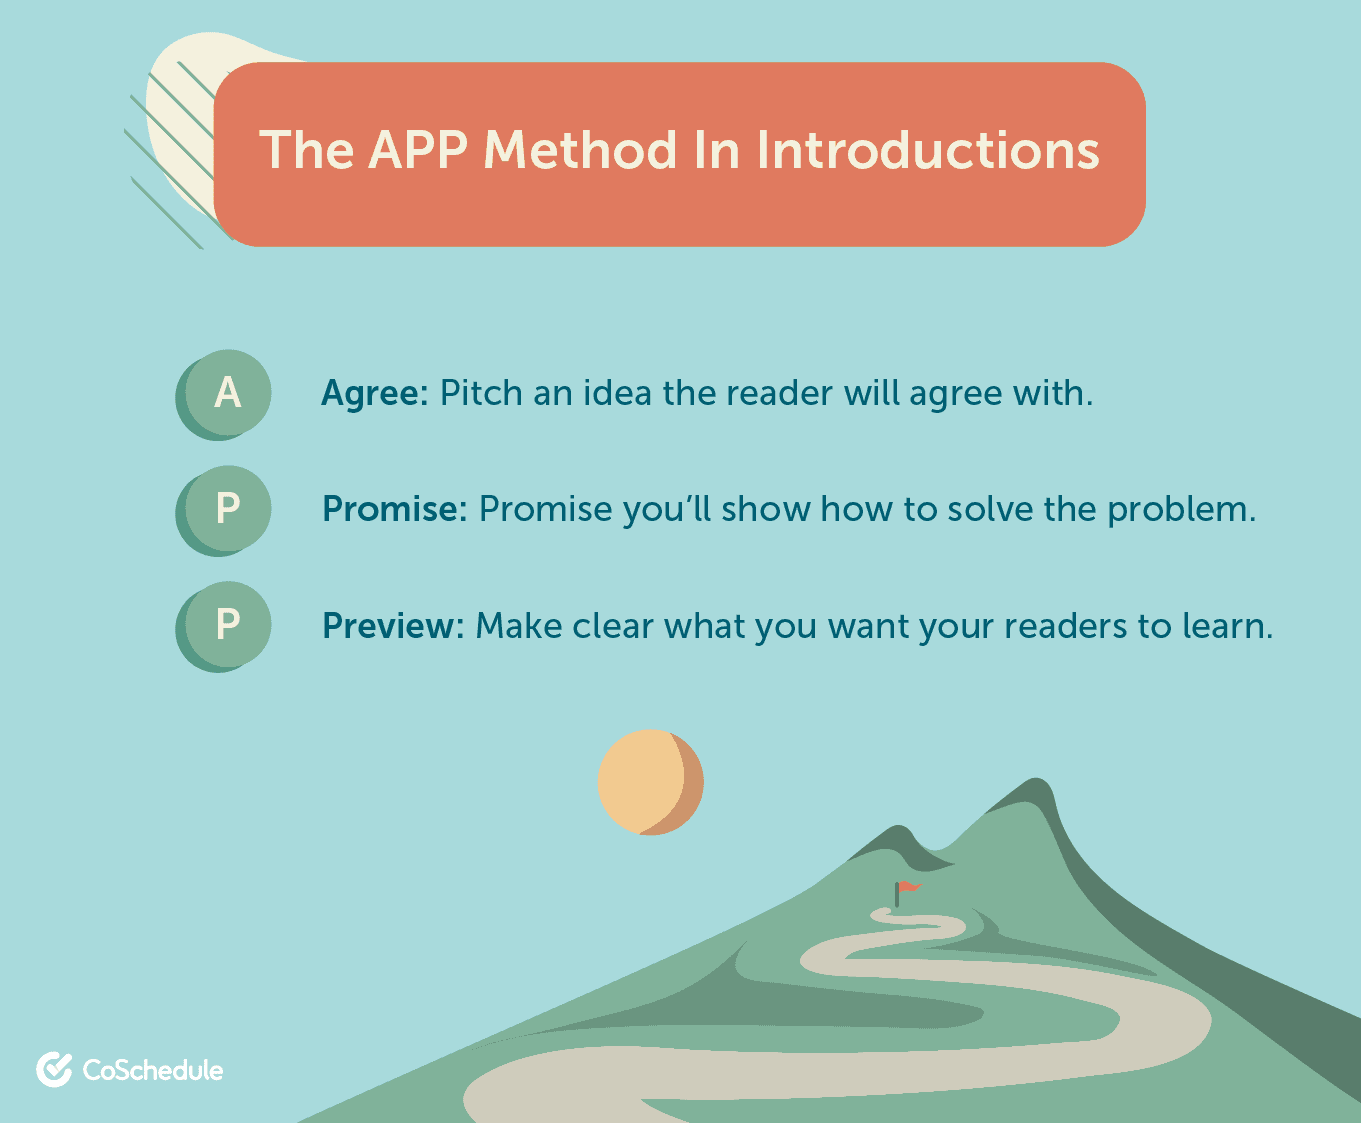 The APP method for introductions